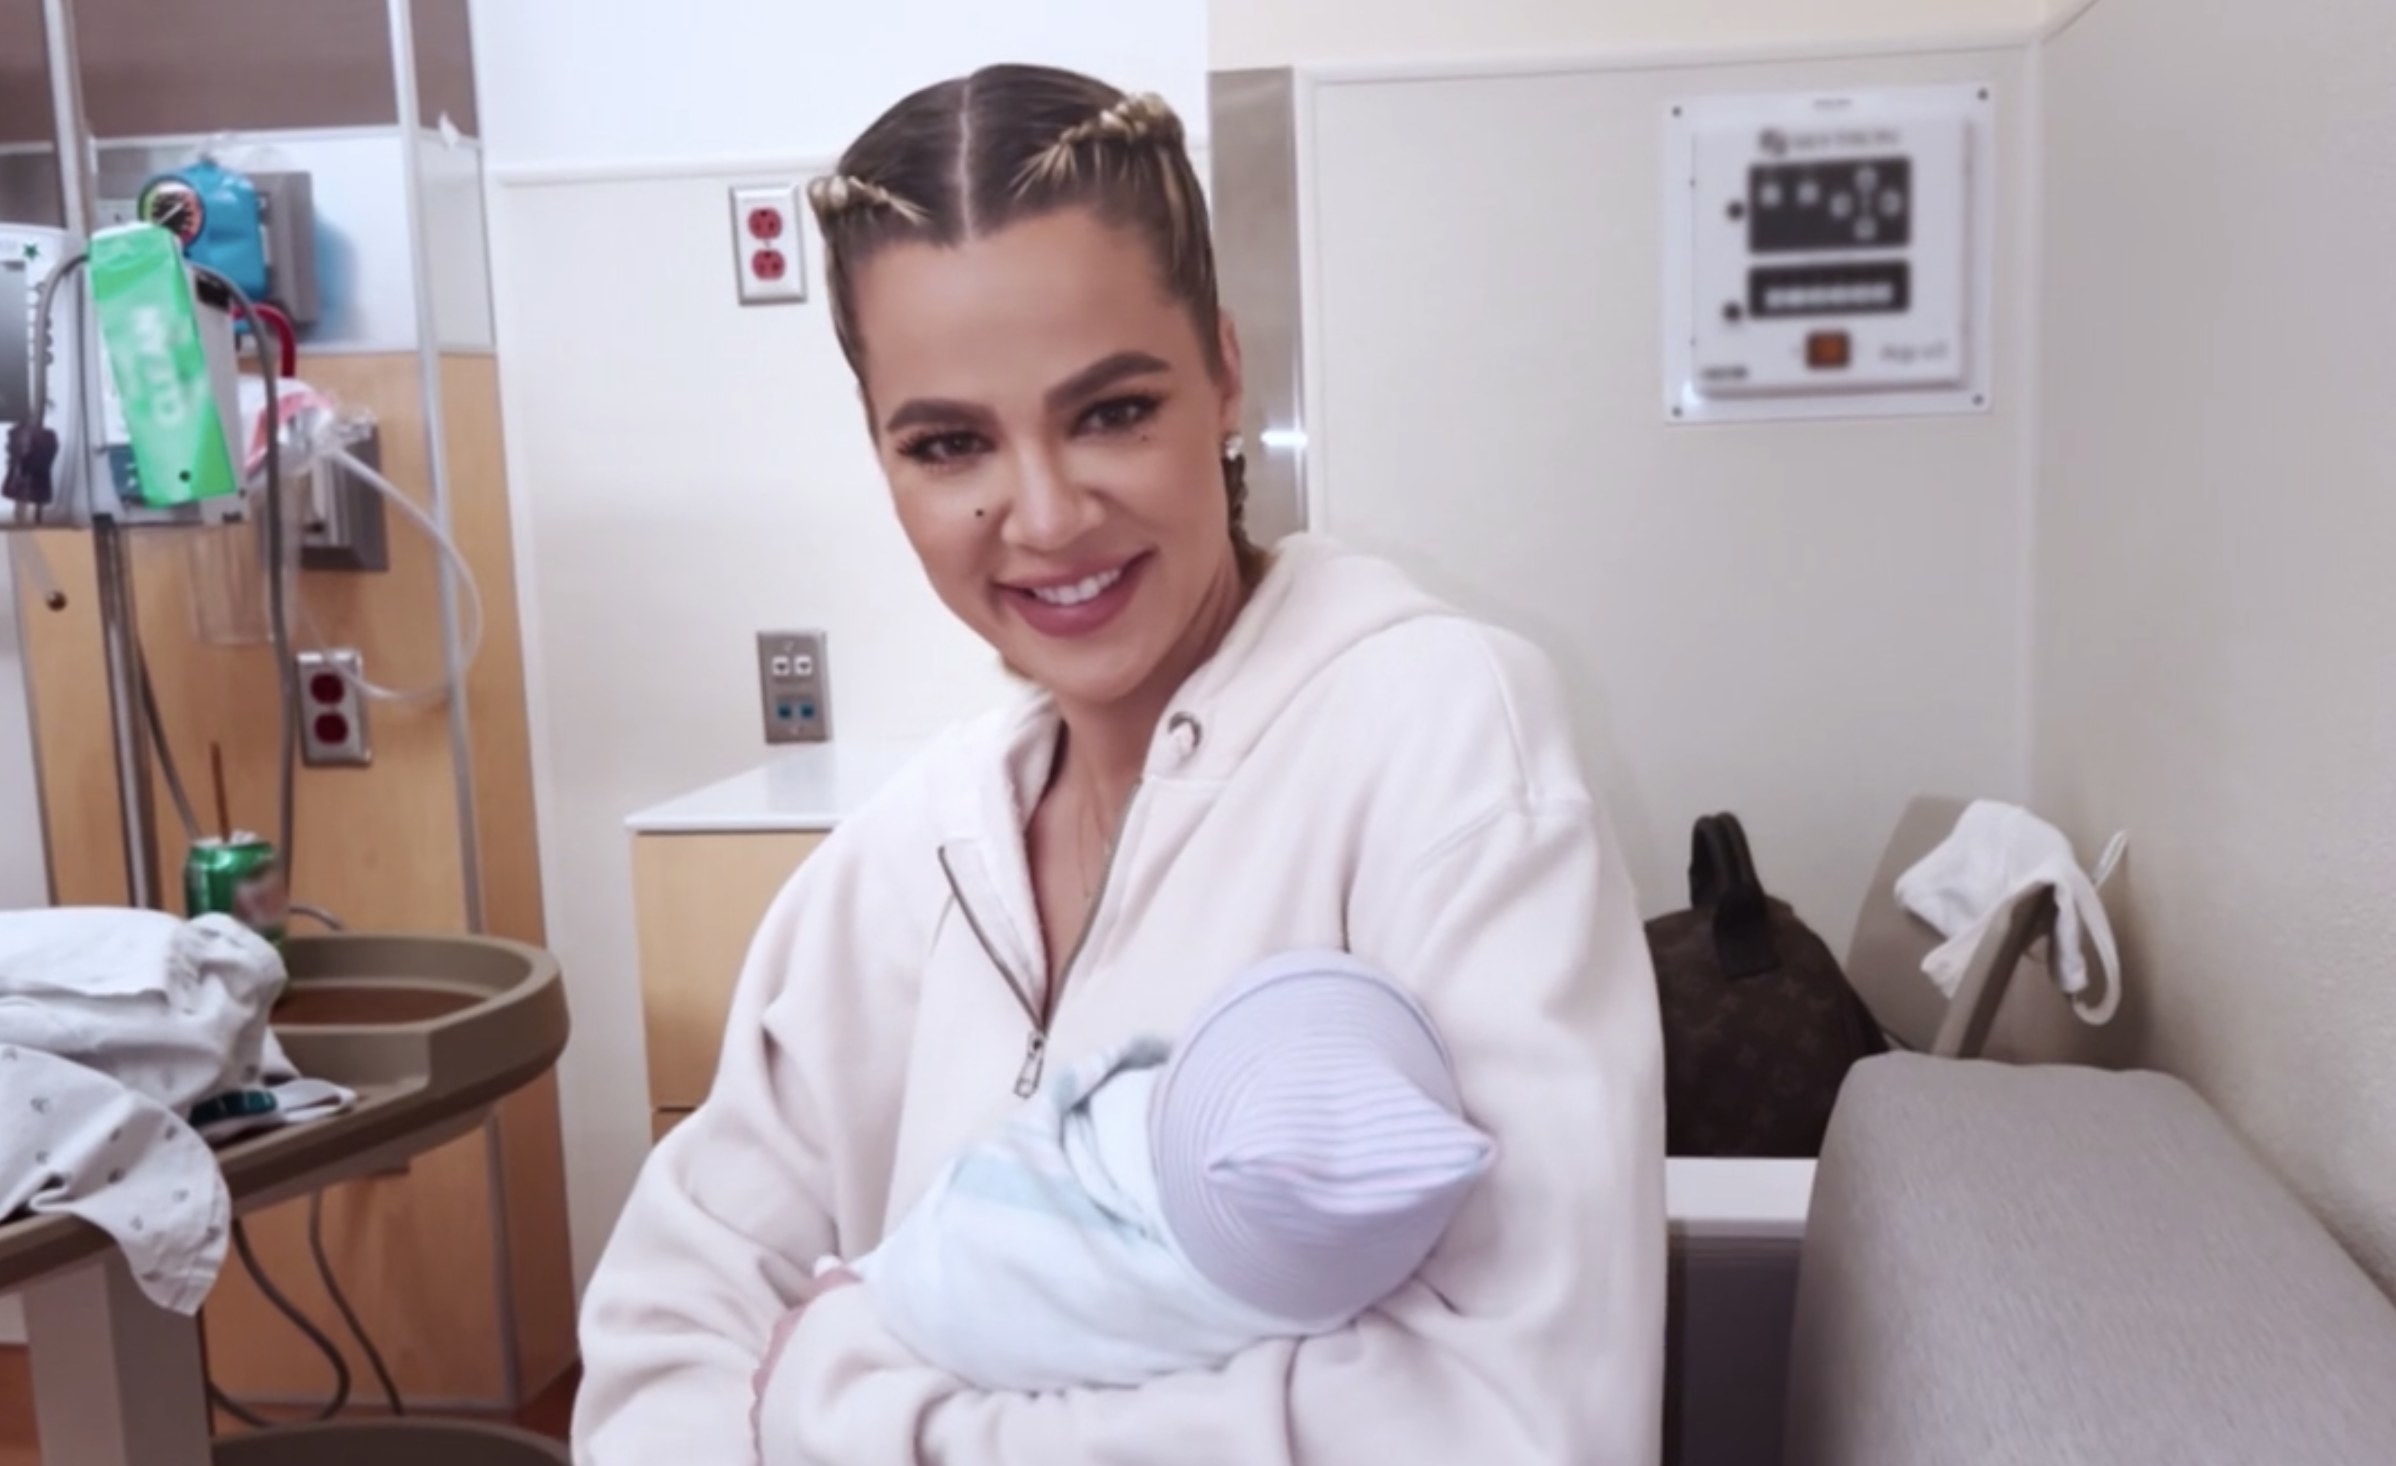 Khloe smiles while holding the baby